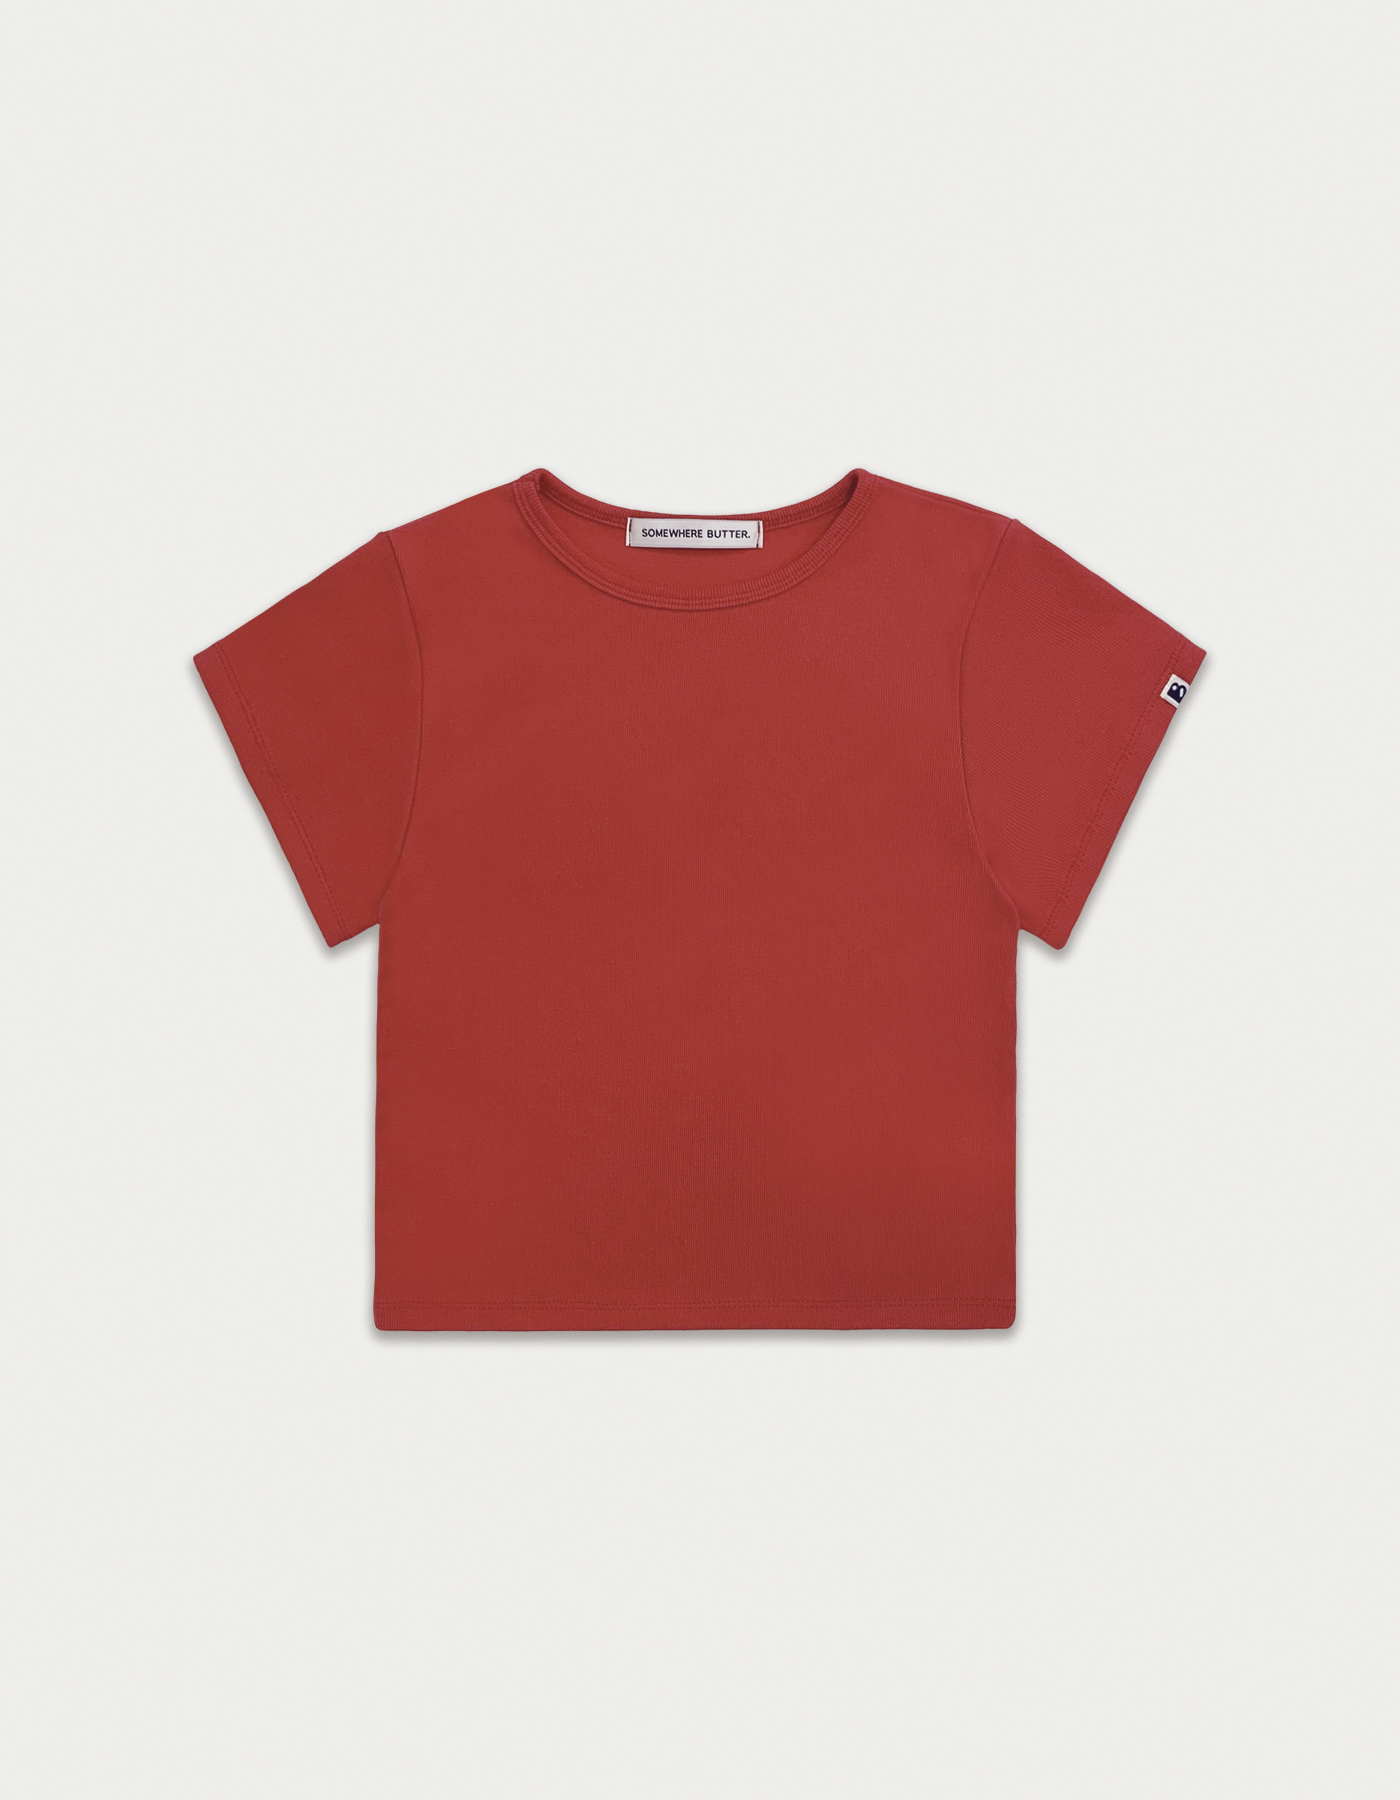 [3rd Order 6.4 출고] Essential clean top - red